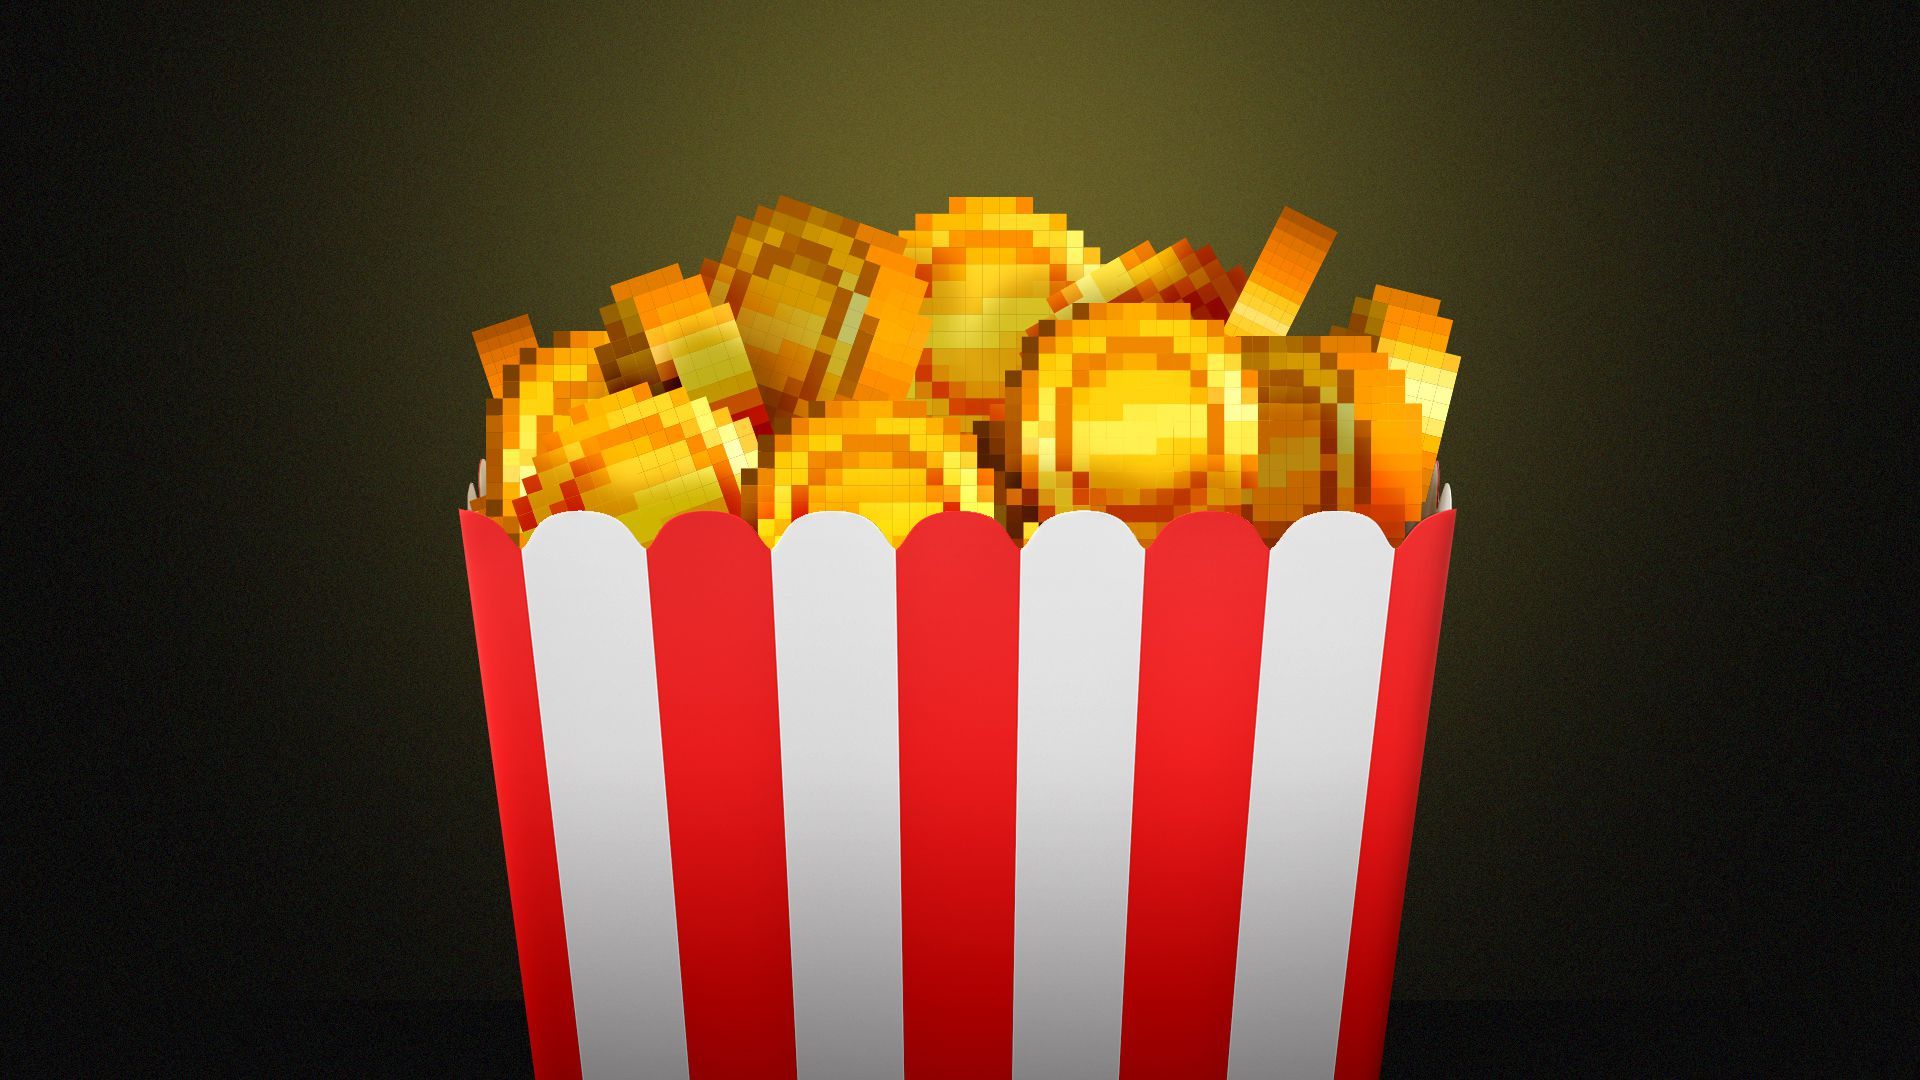 Illustration of a popcorn box filled with pixelated coins